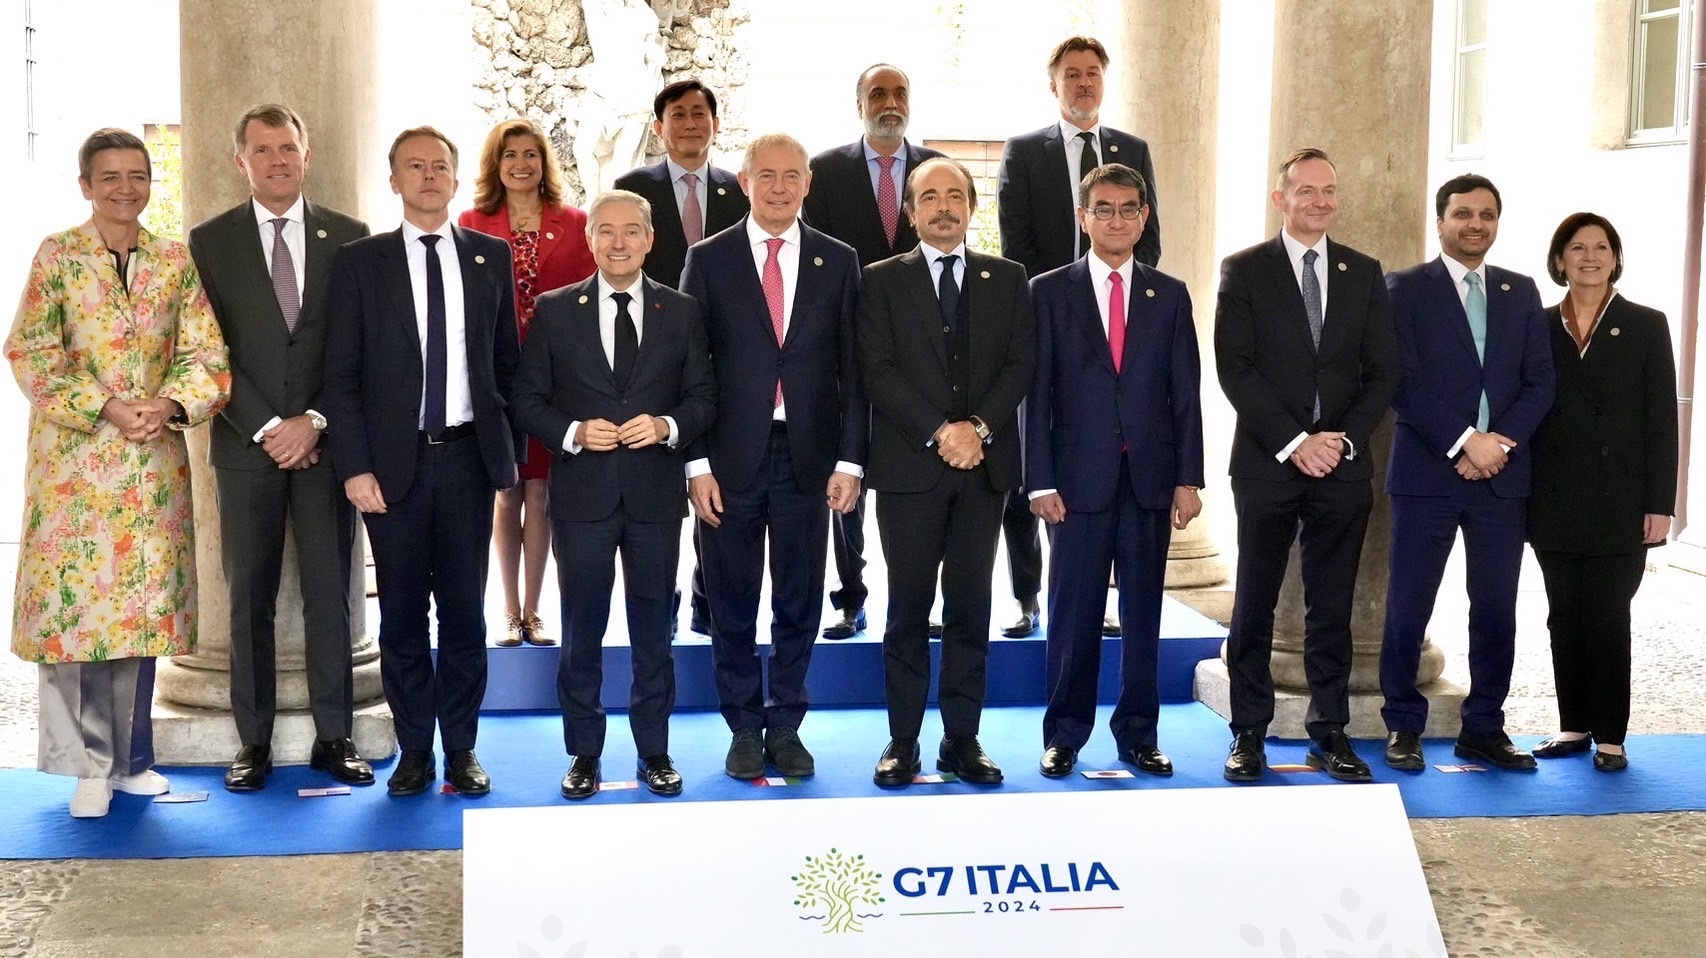 Group photo of participating G7 ministers.